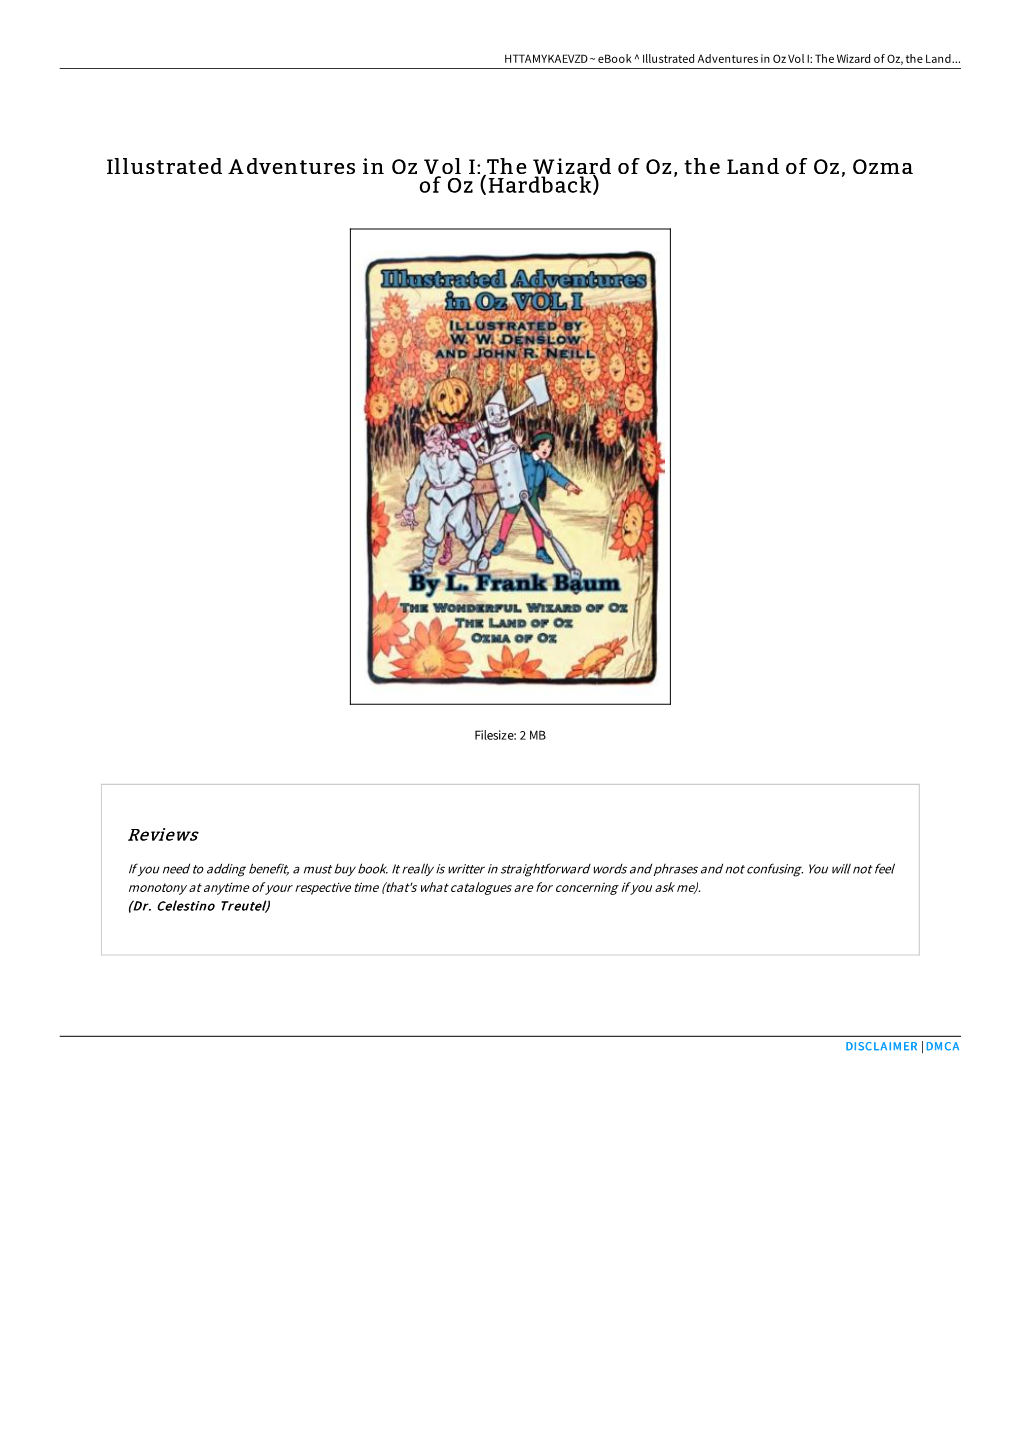 Download Book ^ Illustrated Adventures in Oz Vol I: the Wizard Of